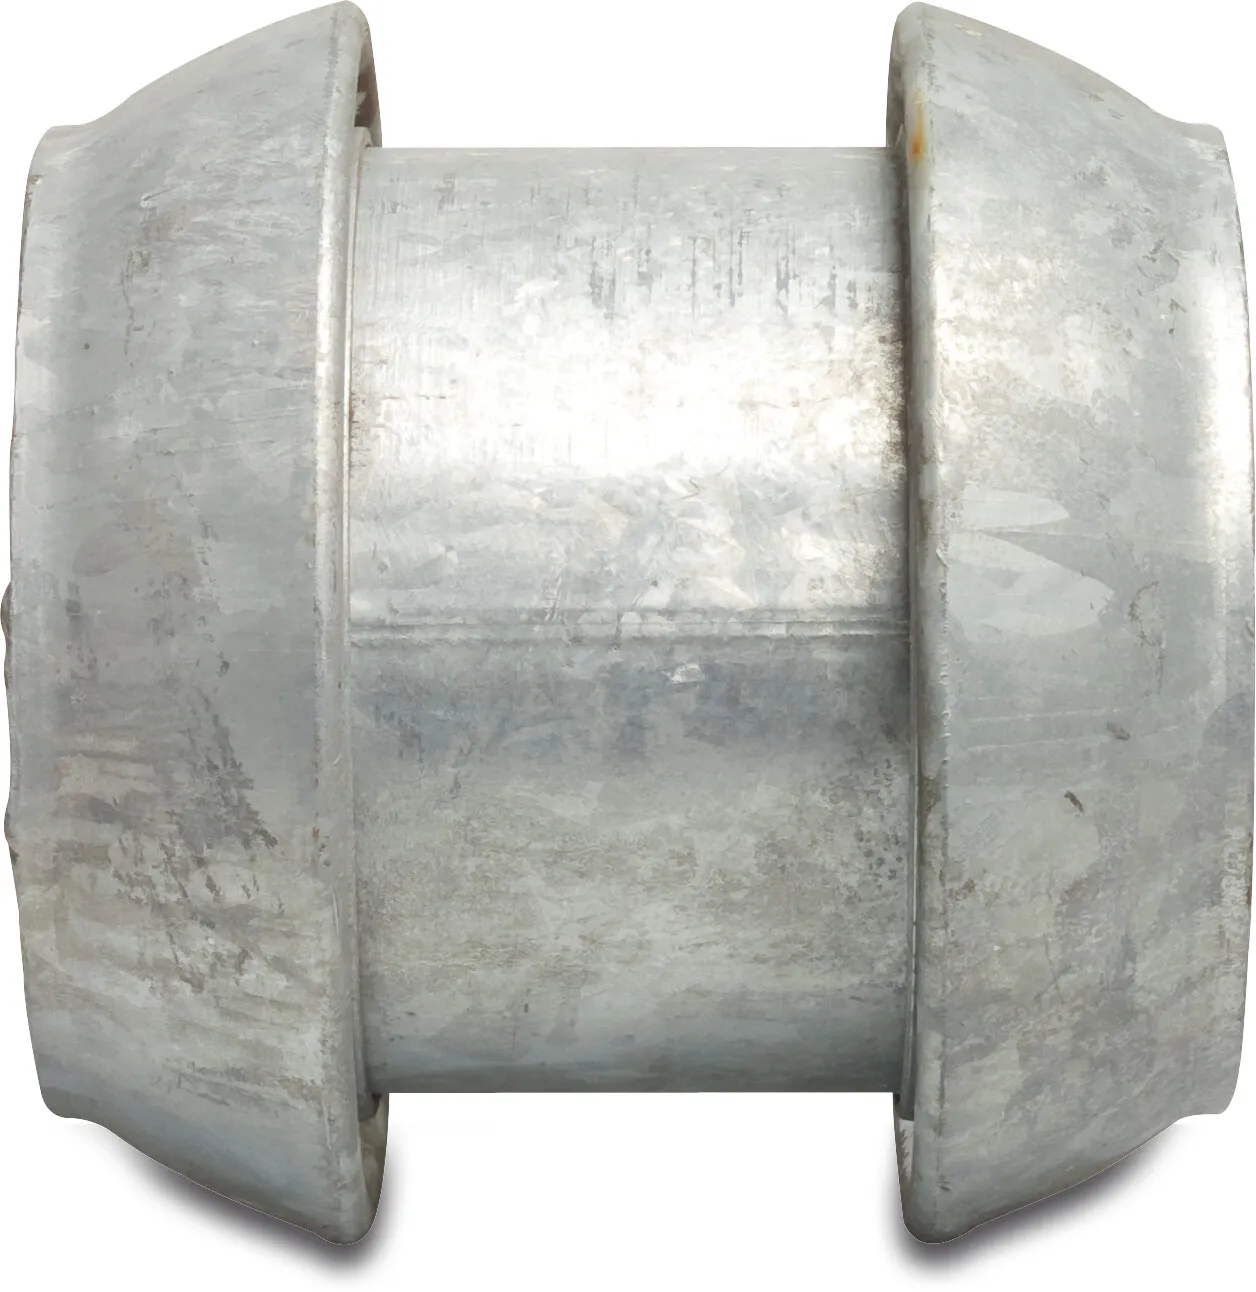 Quick coupler steel galvanised 108 mm male part Perrot type Perrot